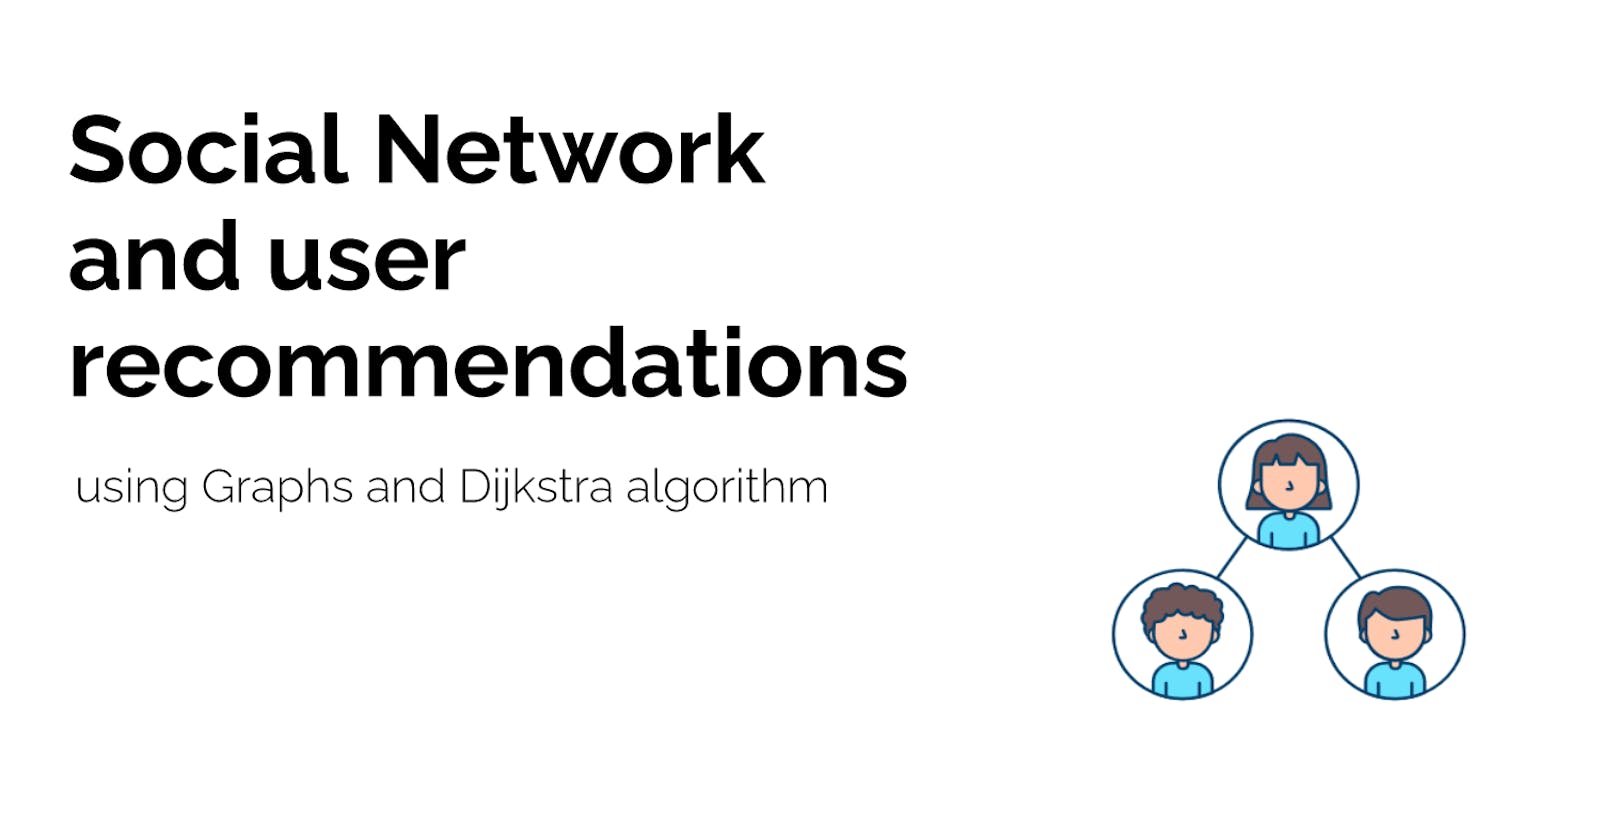 Social Network and user recommendations using Graphs and Dijkstra algorithm